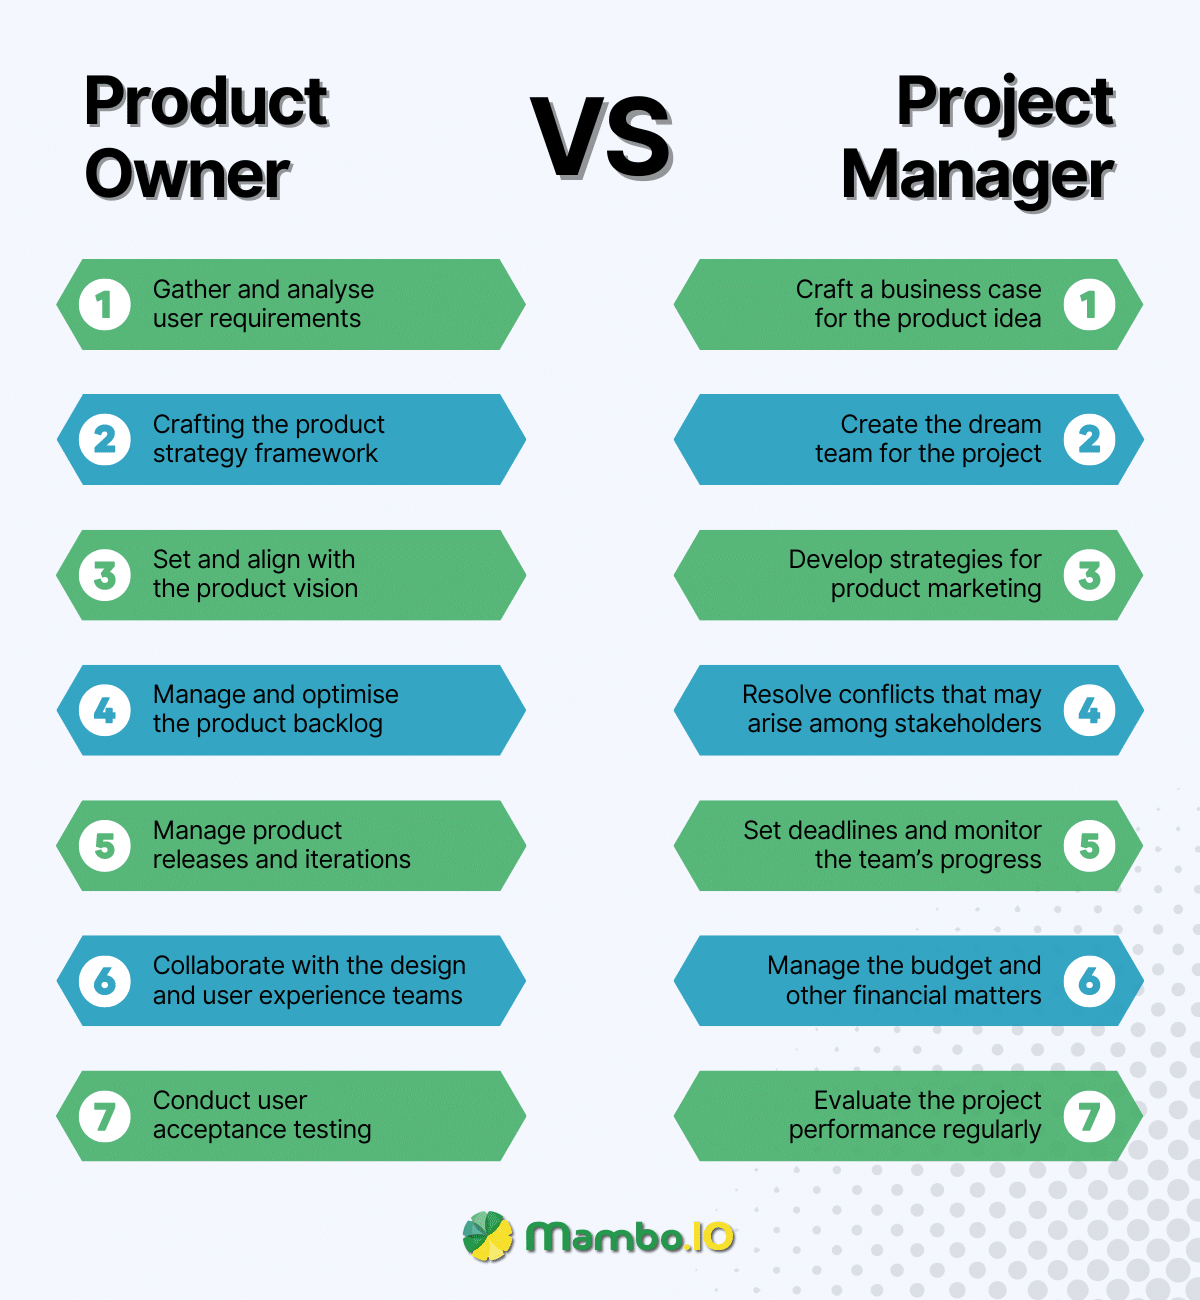 Product Owner vs Project Manager Responsibilities